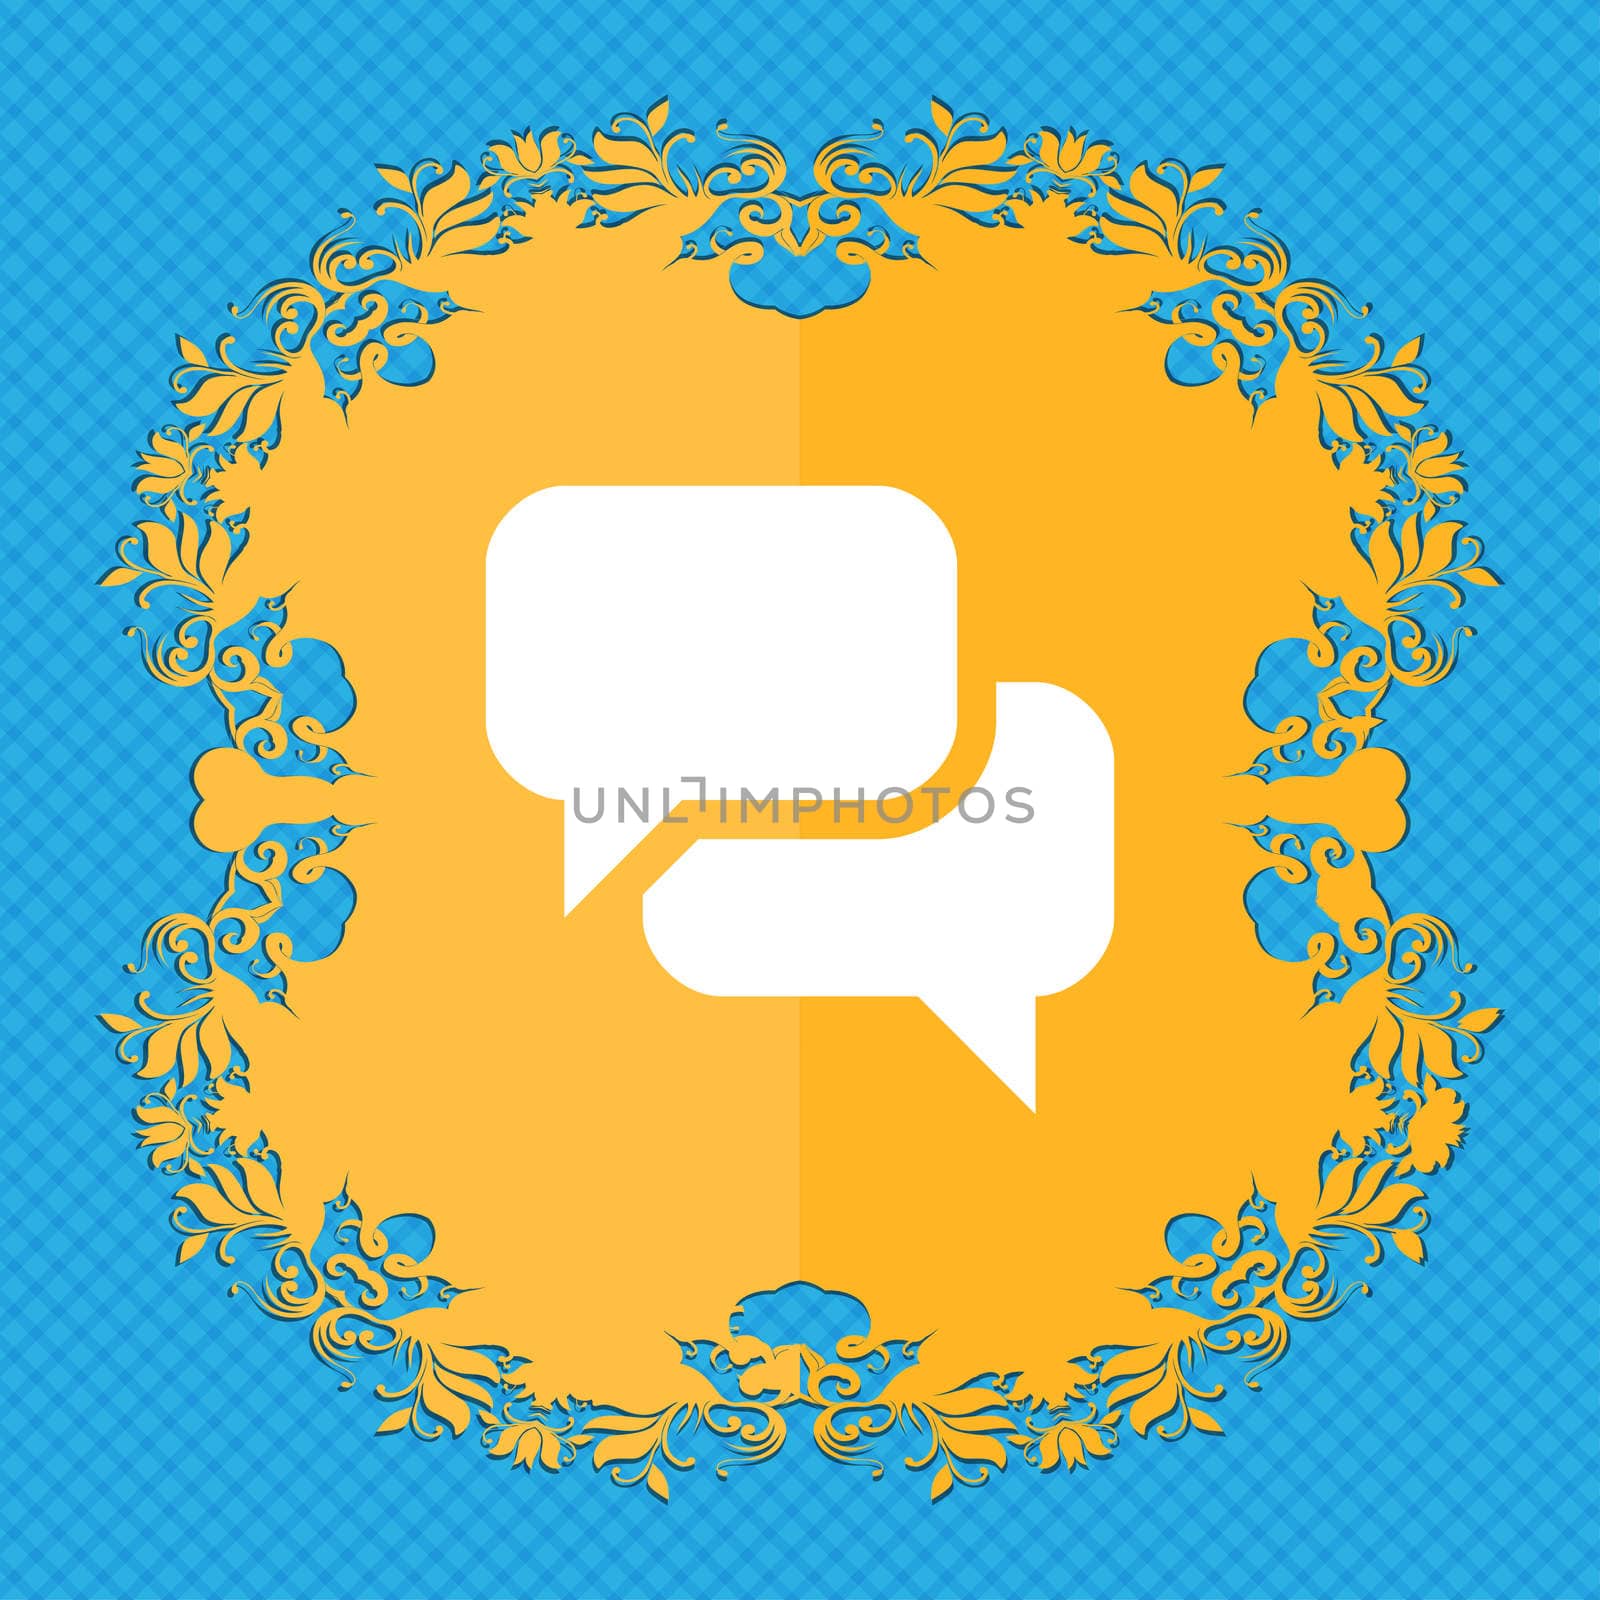 Speech bubble, Think cloud . Floral flat design on a blue abstract background with place for your text. illustration